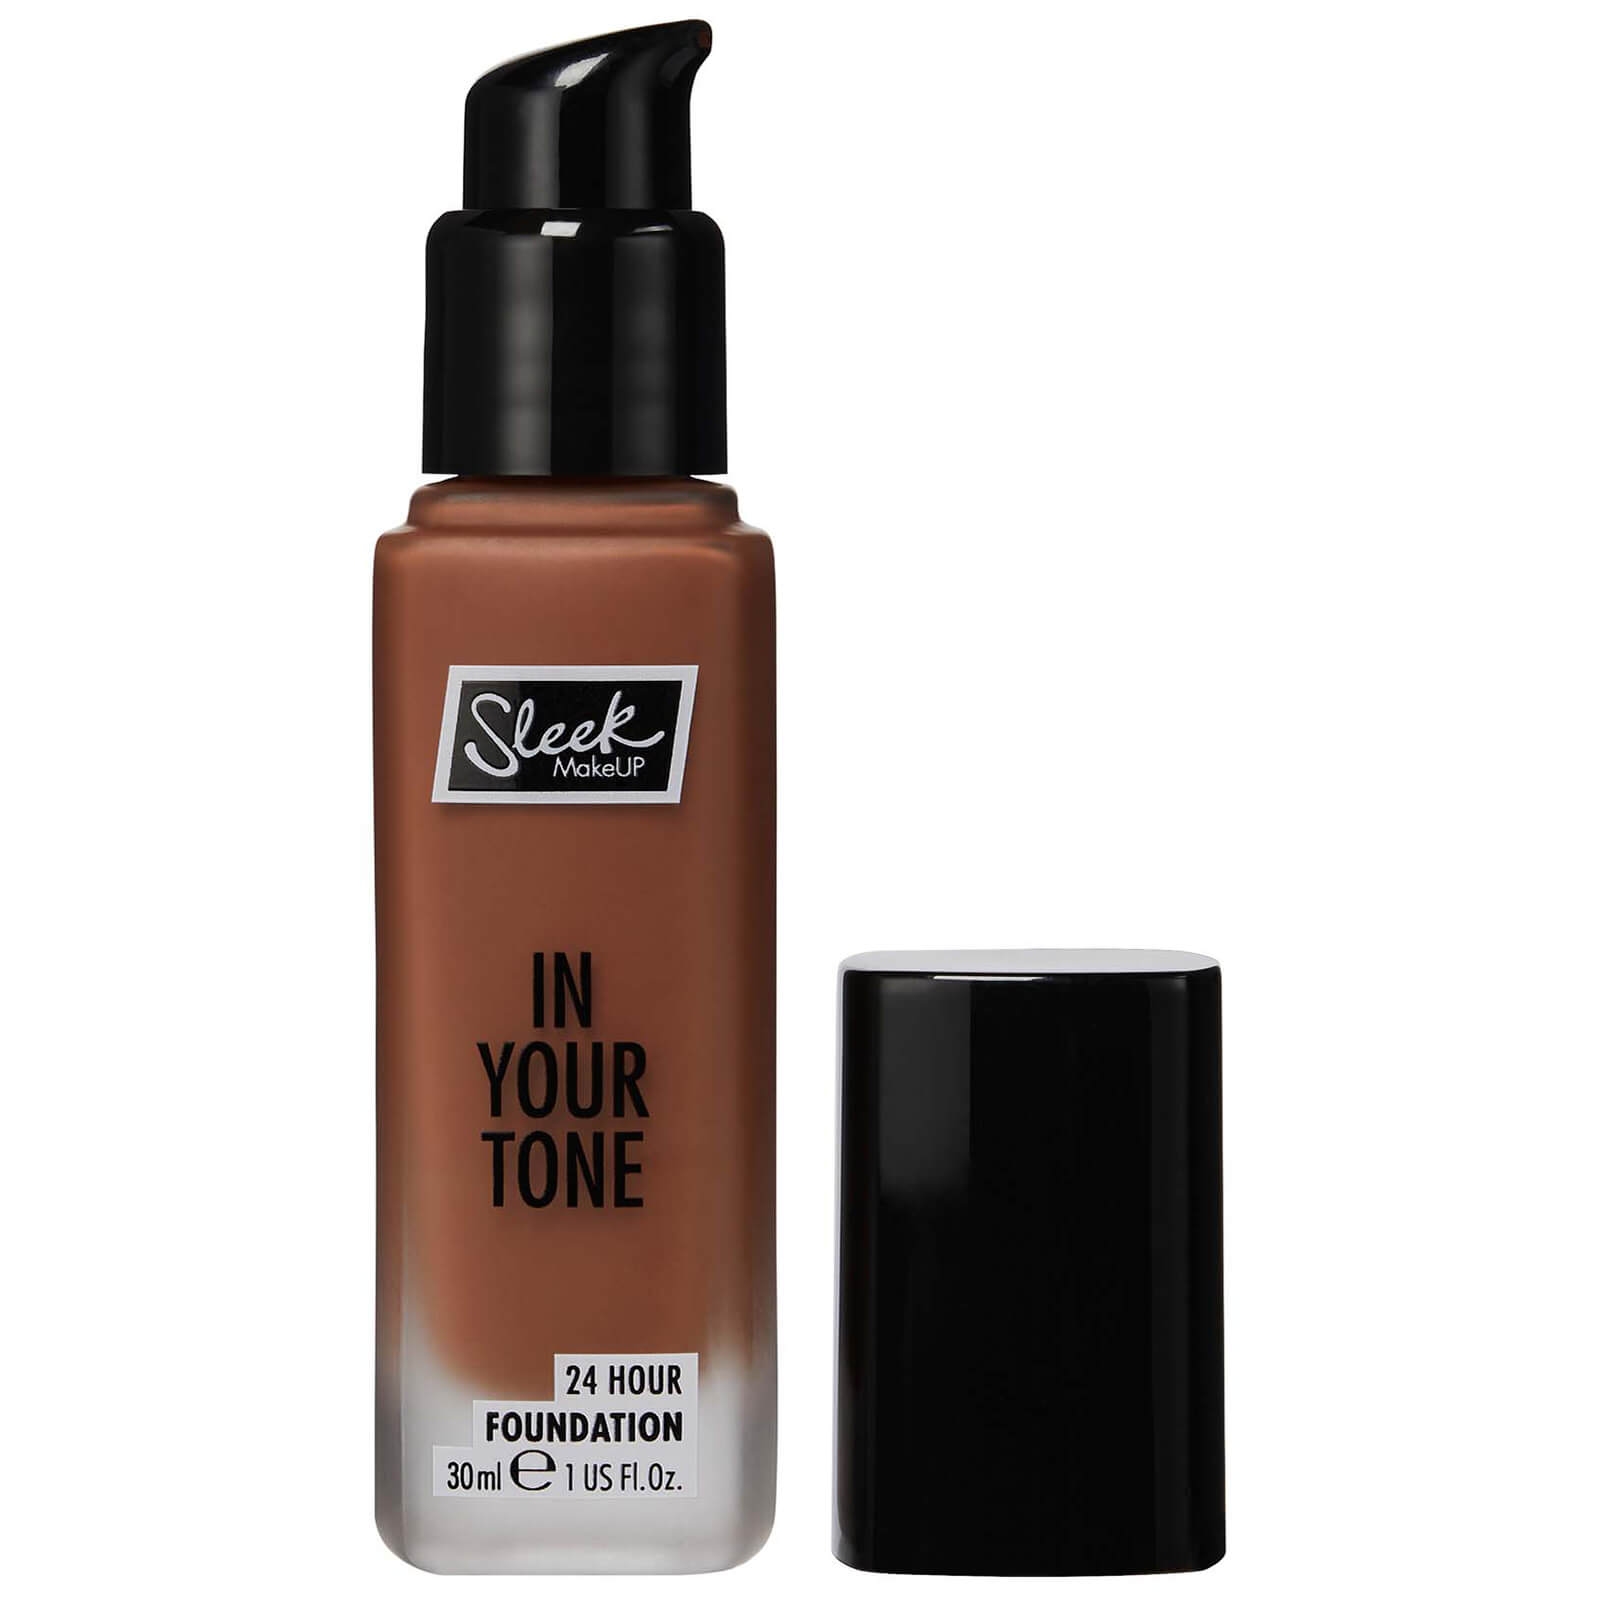 Sleek MakeUP in Your Tone 24 Hour Foundation 30ml (Various Shades) - 10C